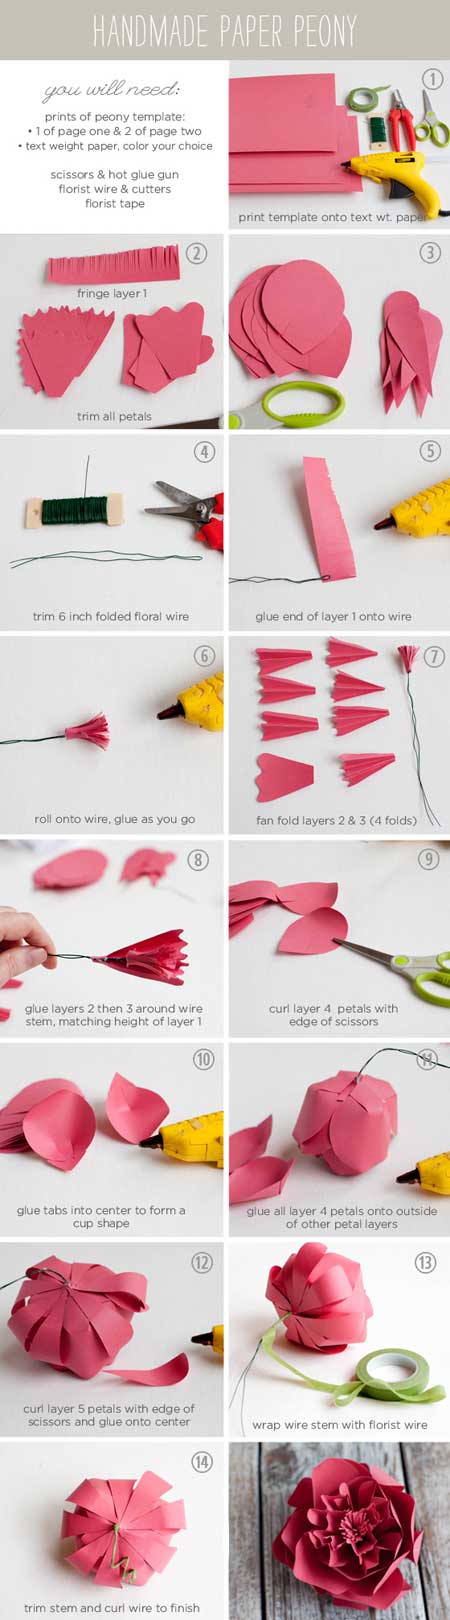 PaperPeonyInstructions